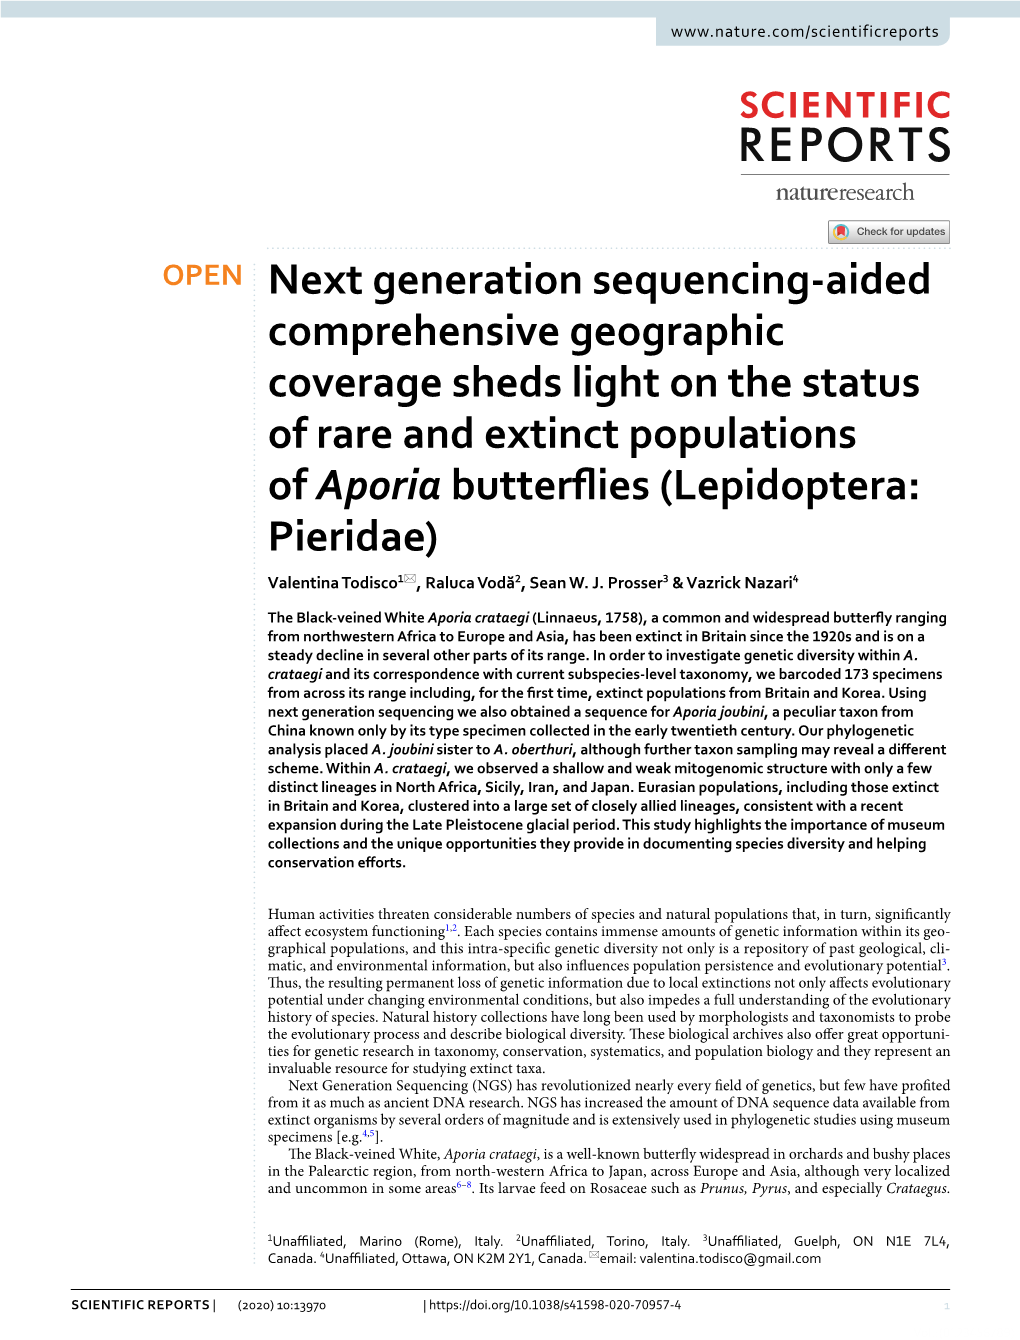 Next Generation Sequencing-Aided Comprehensive Geographic